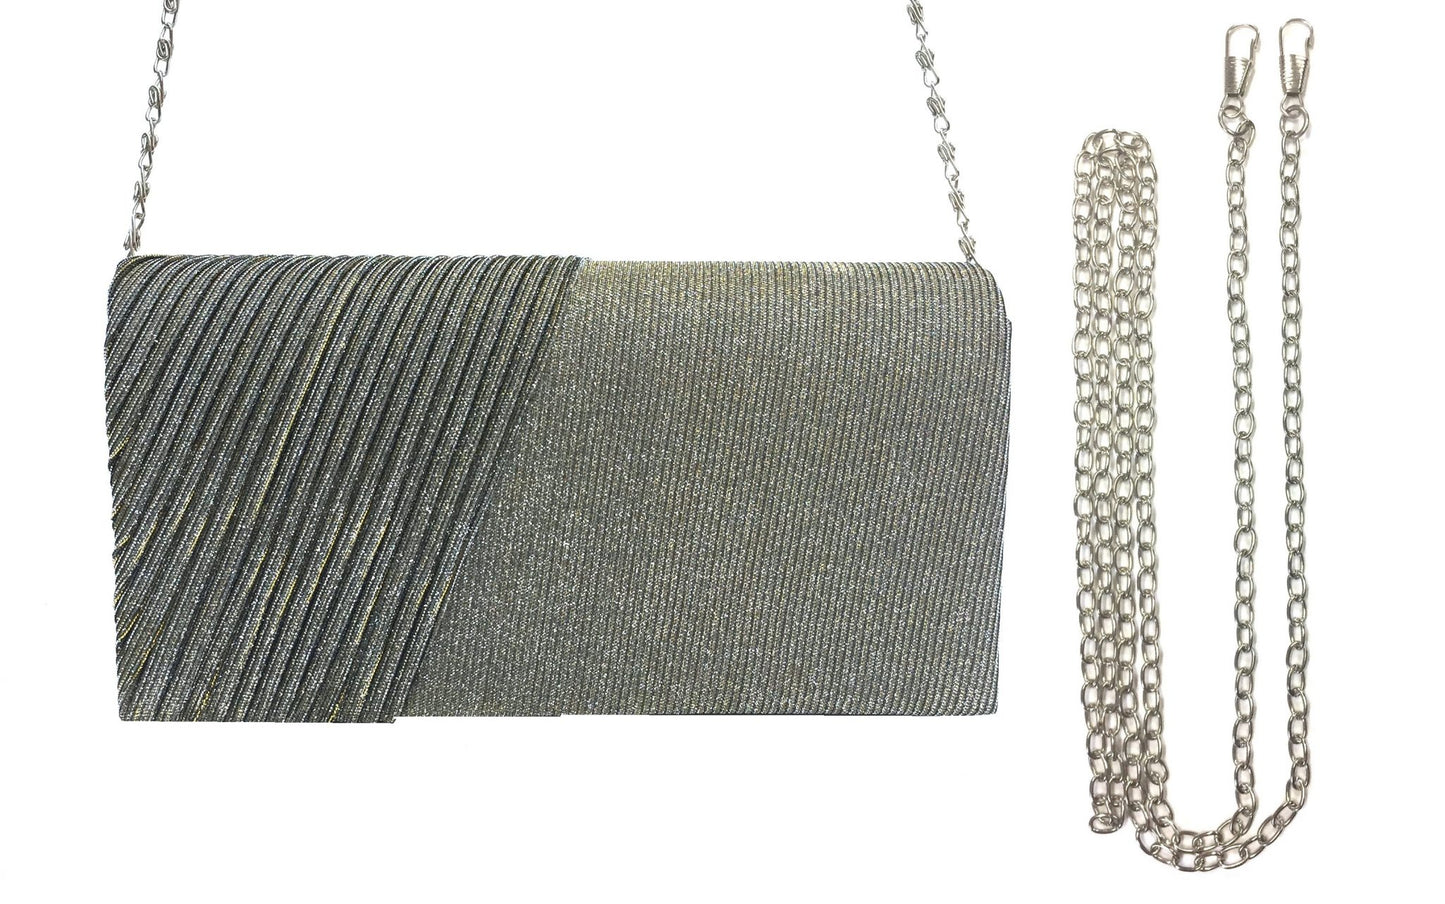 Silver clutch with pleated front 782